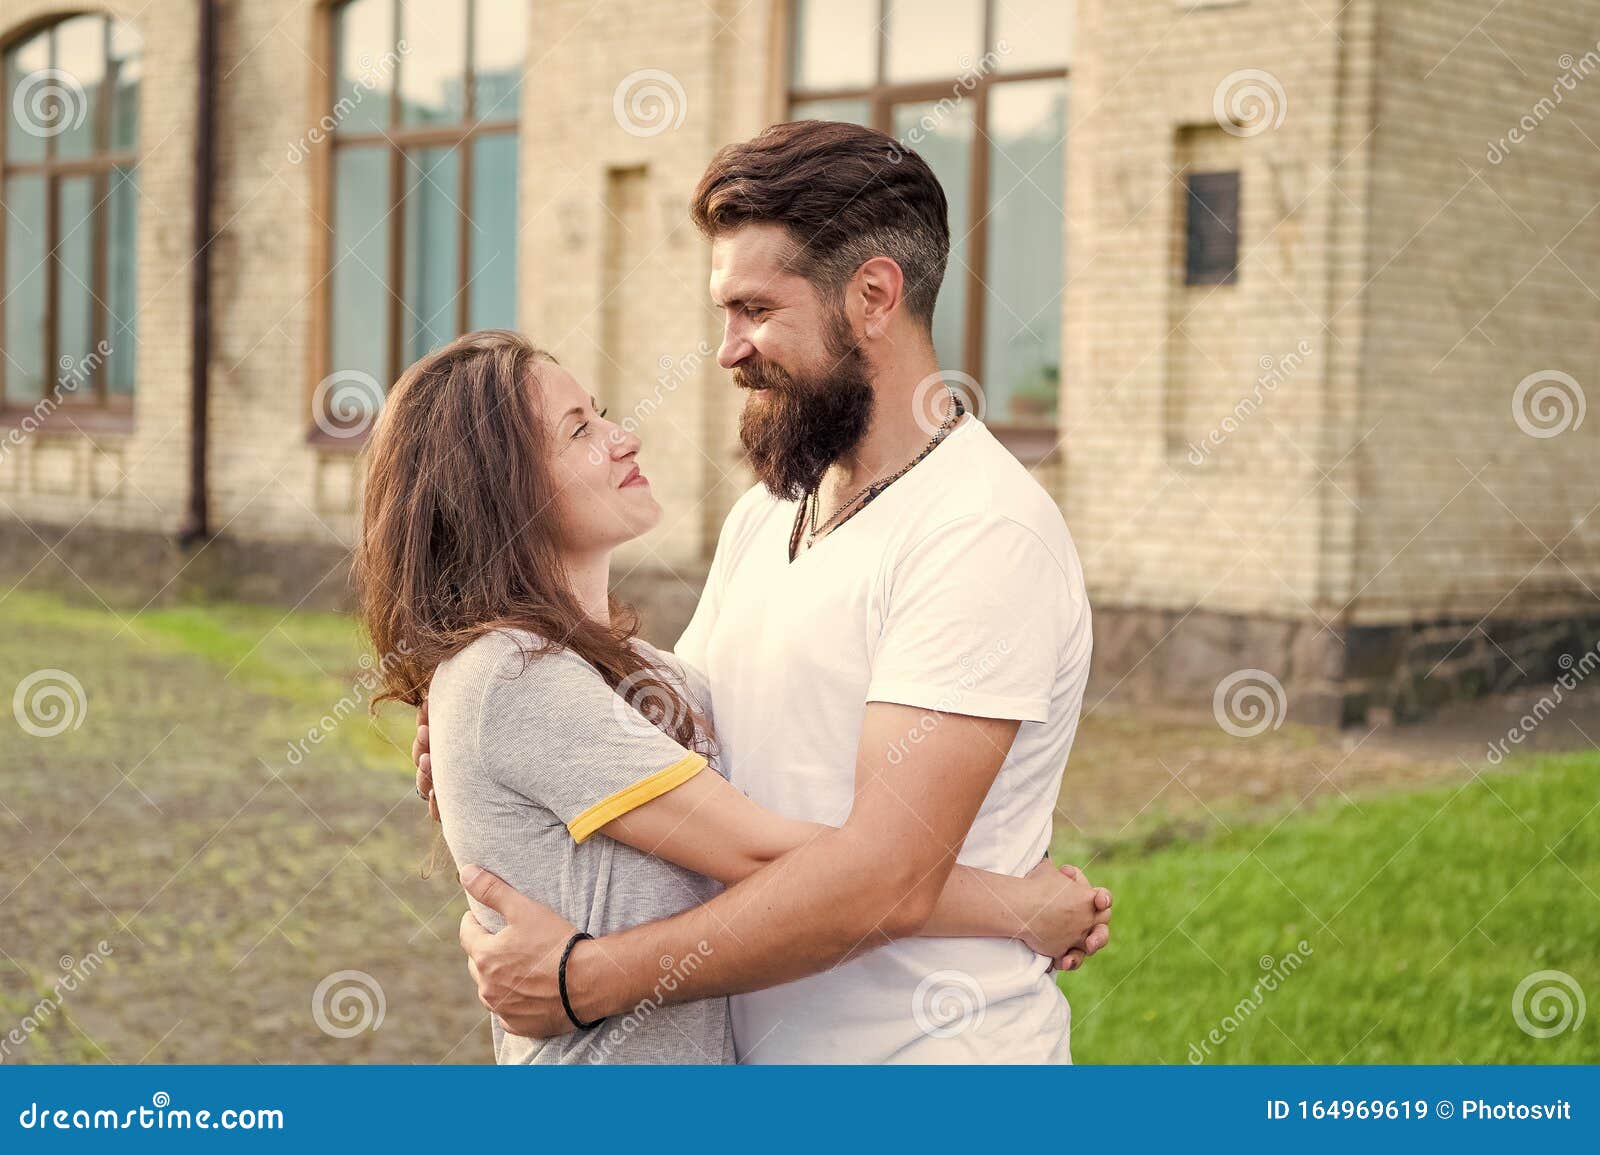 Happy Together Couple In Love Walking Having Fun Man Bearded Hipster